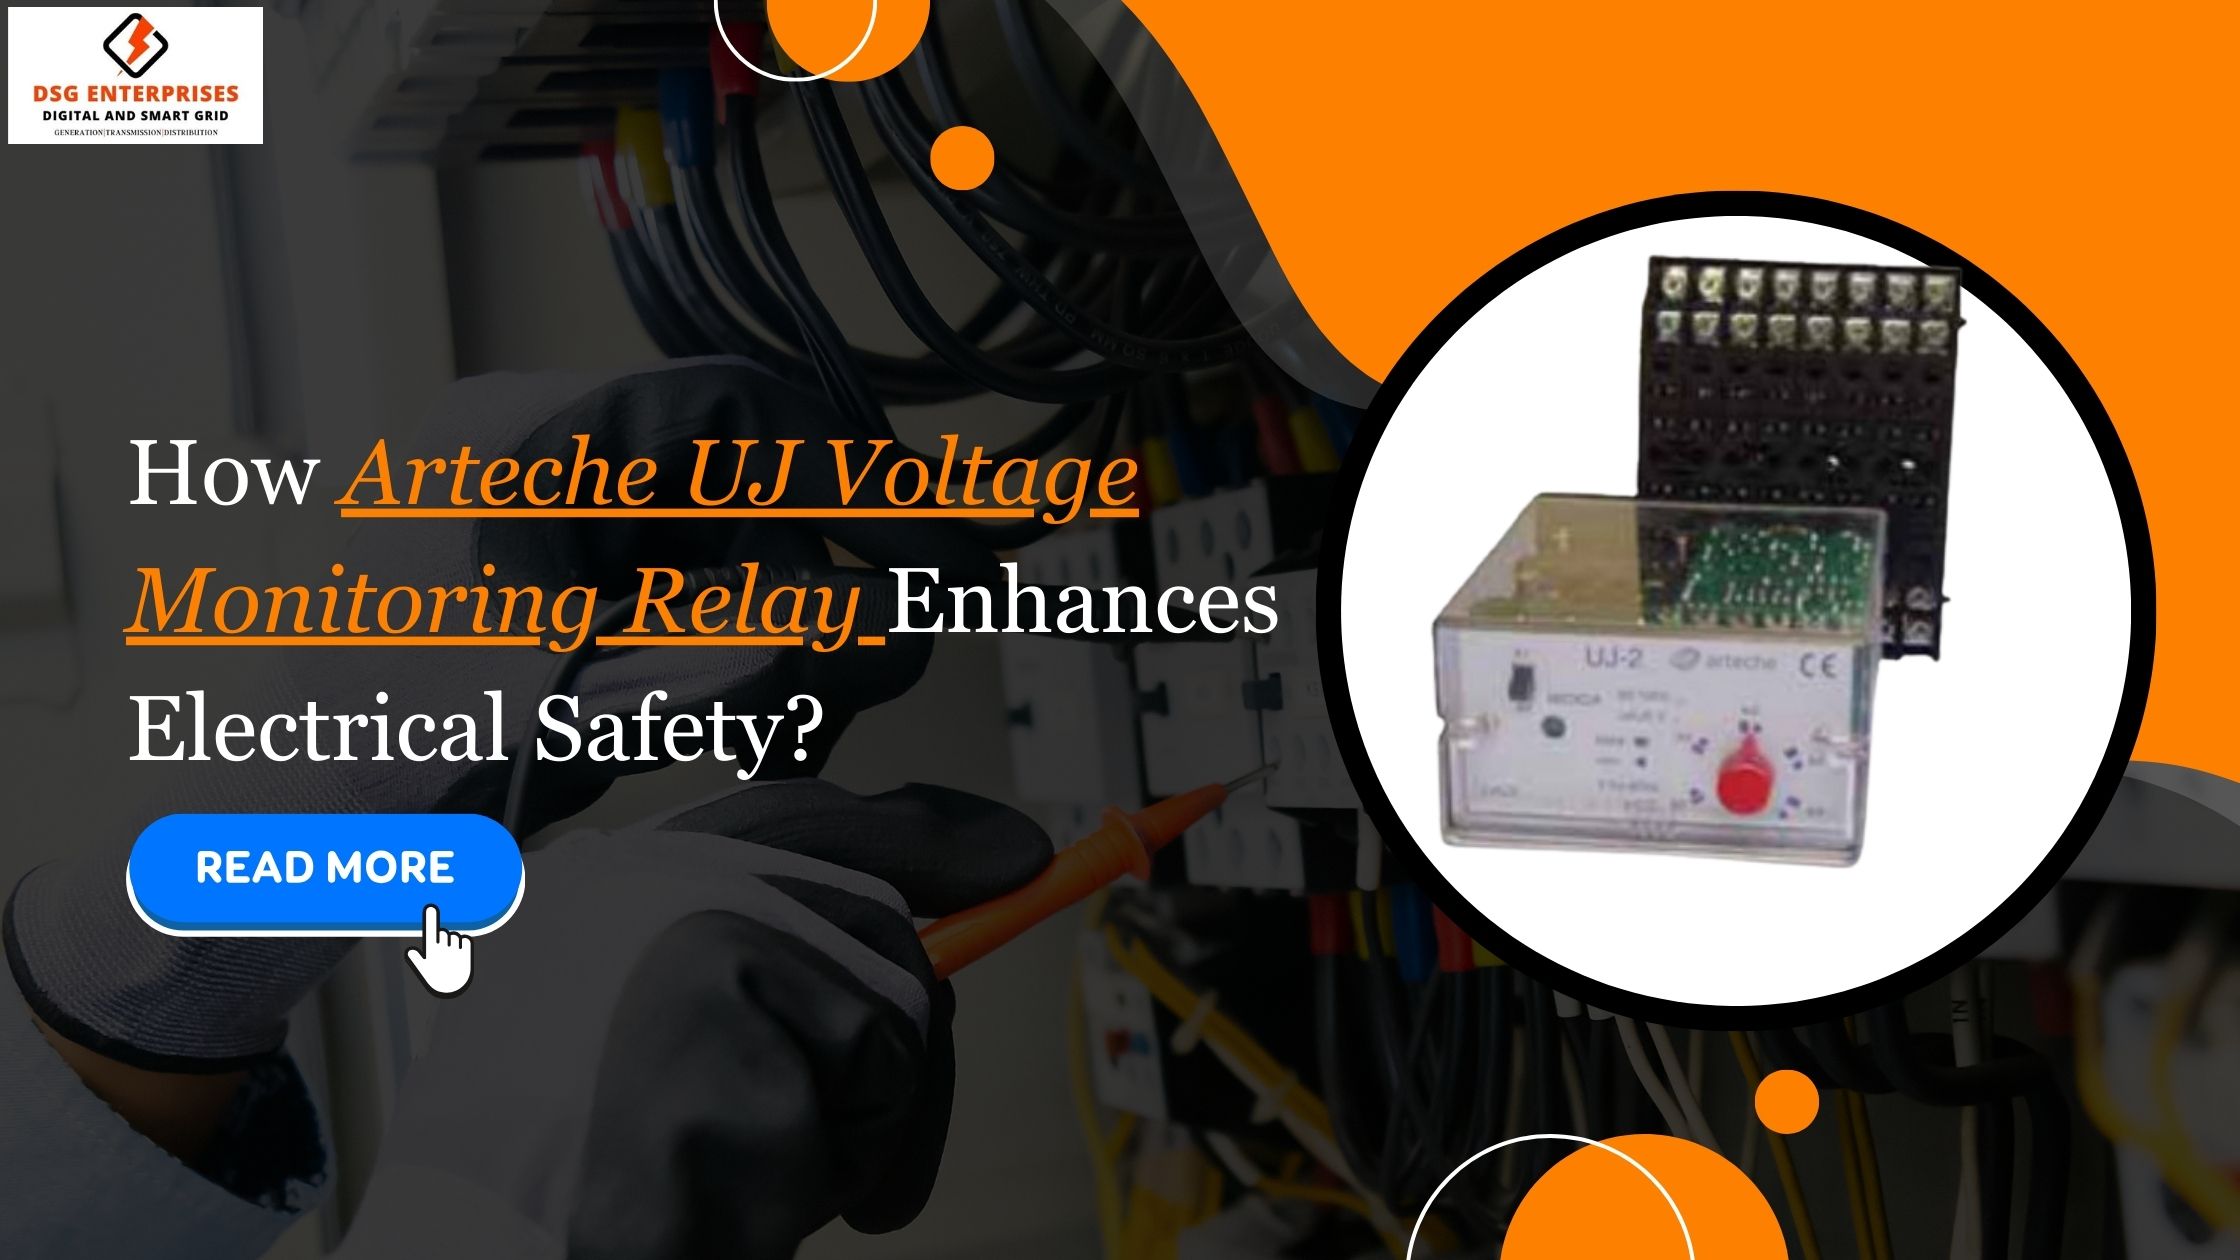 You are currently viewing How Arteche UJ Voltage Monitoring Relay Enhances Electrical Safety